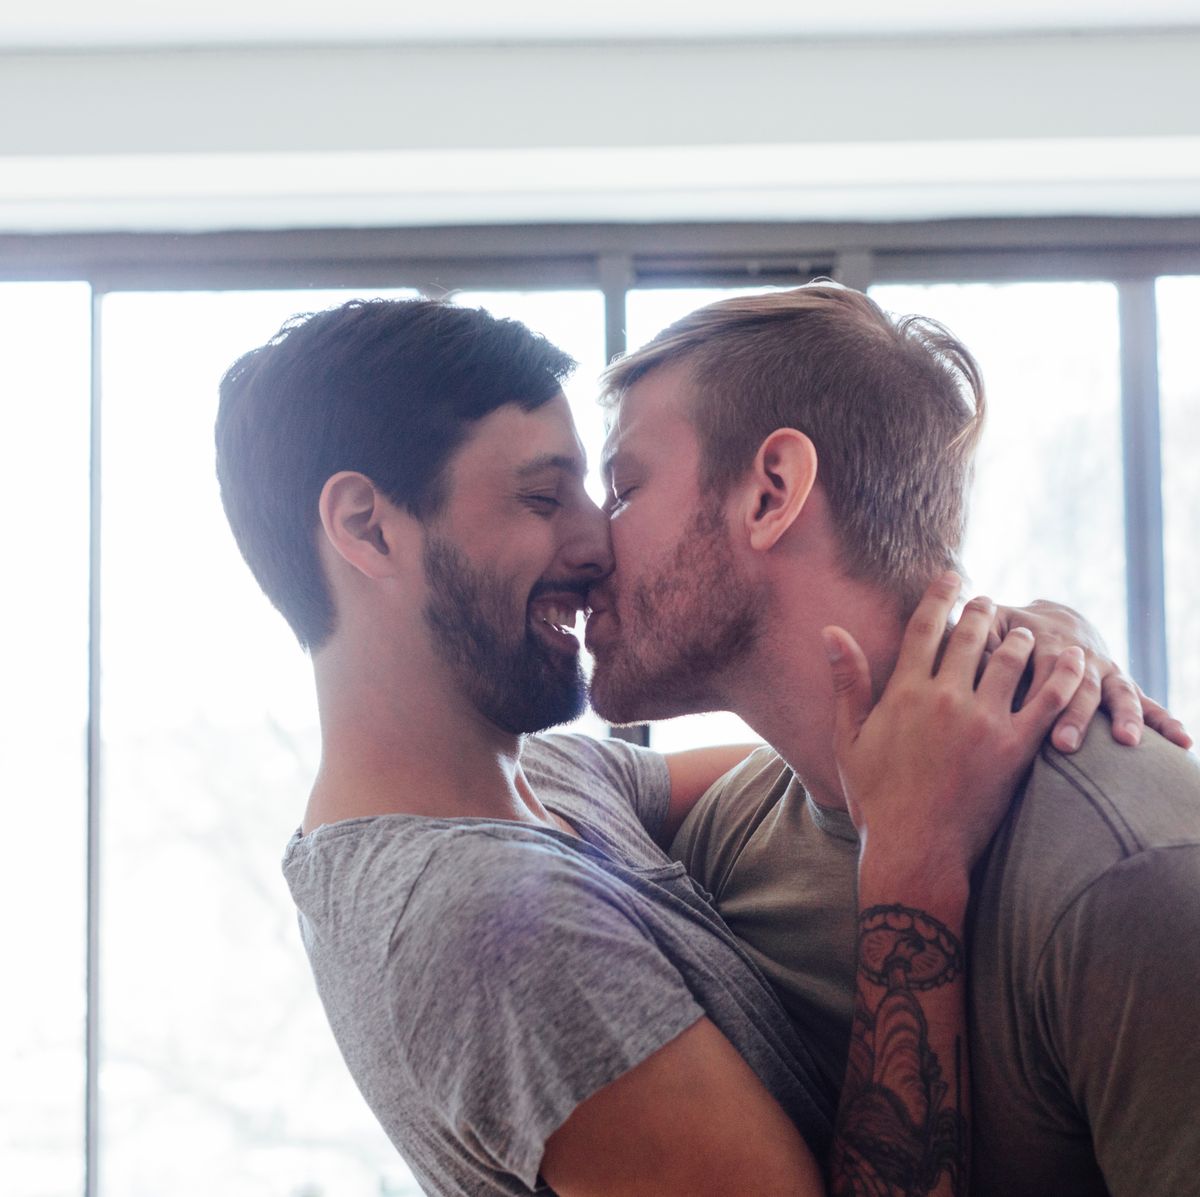 Force Couple Fuck - 8 Expert Tips for Bicurious Guys Ready to Explore Their Sexuality